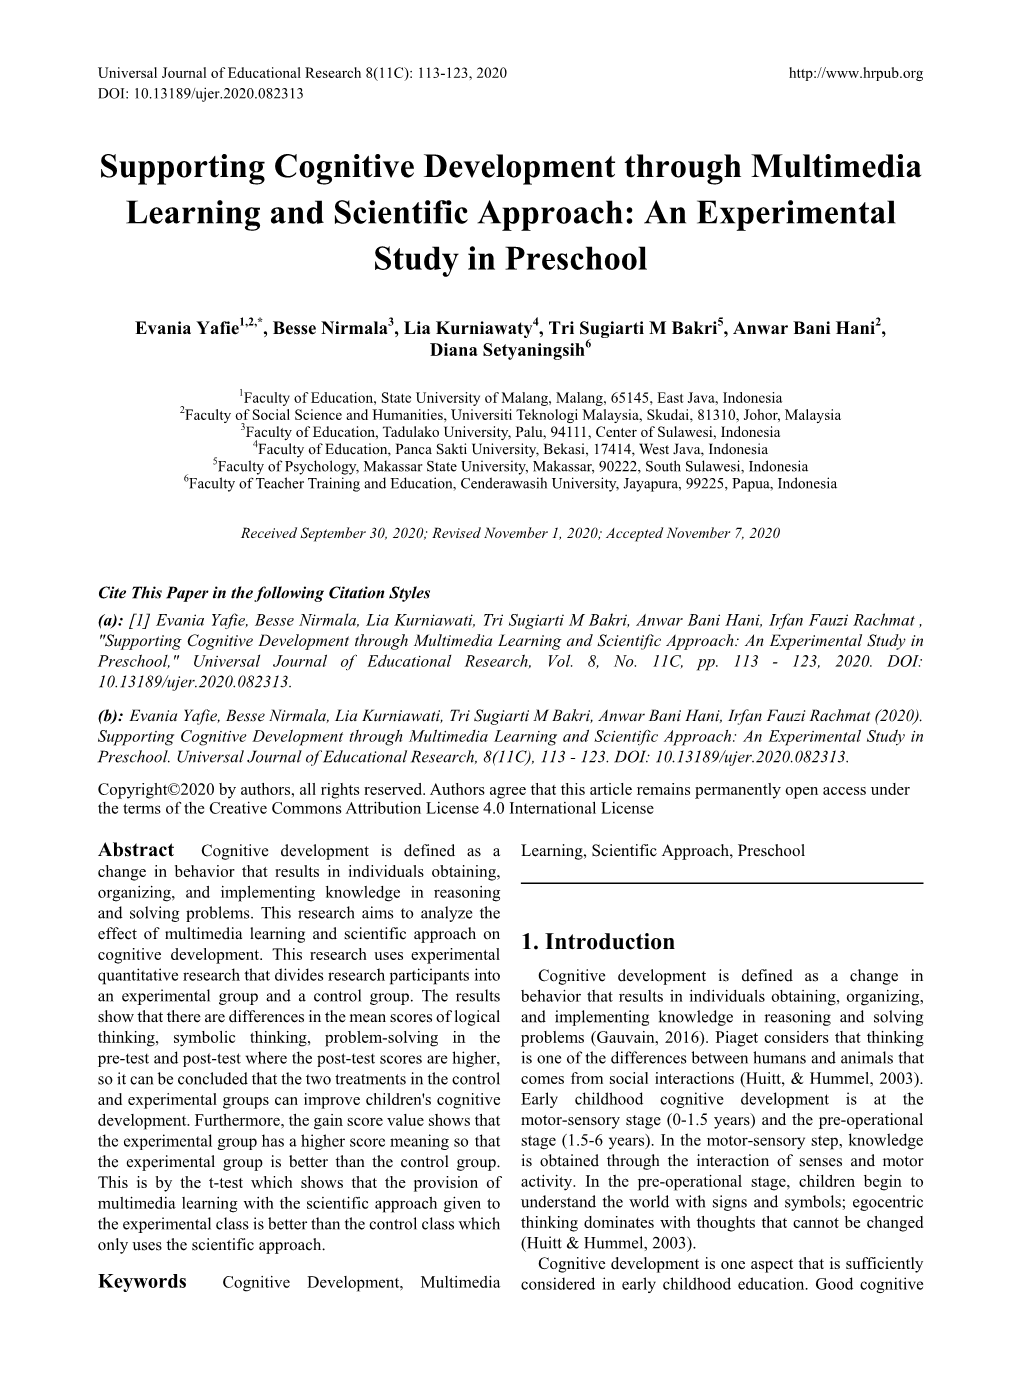 Supporting Cognitive Development Through Multimedia Learning and Scientific Approach: an Experimental Study in Preschool